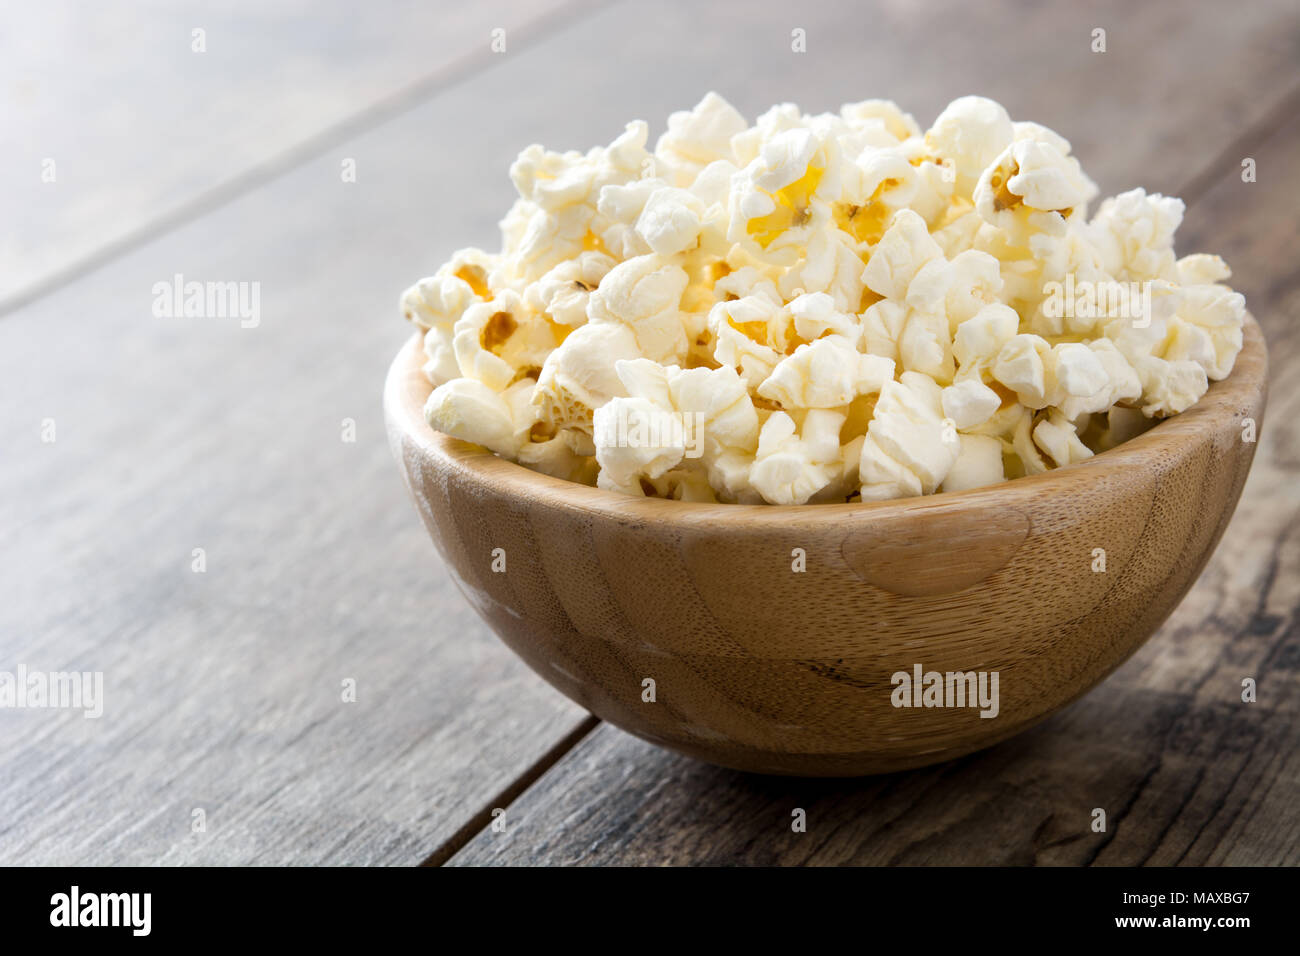 Popcorn in bowl on wooden table. Stock Photo